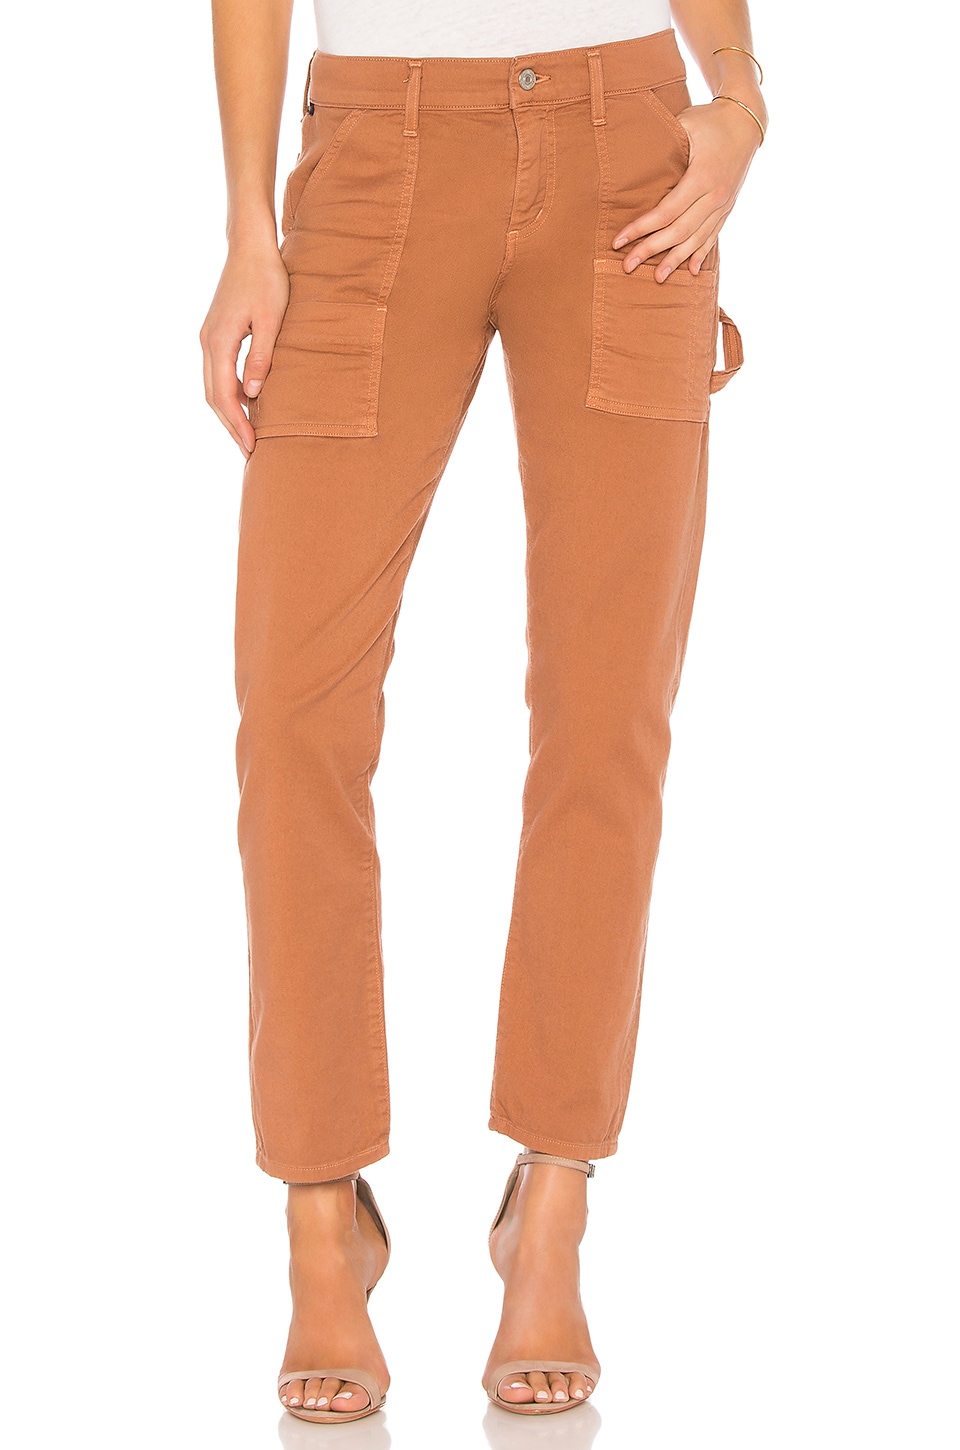 citizens of humanity leah cargo pants